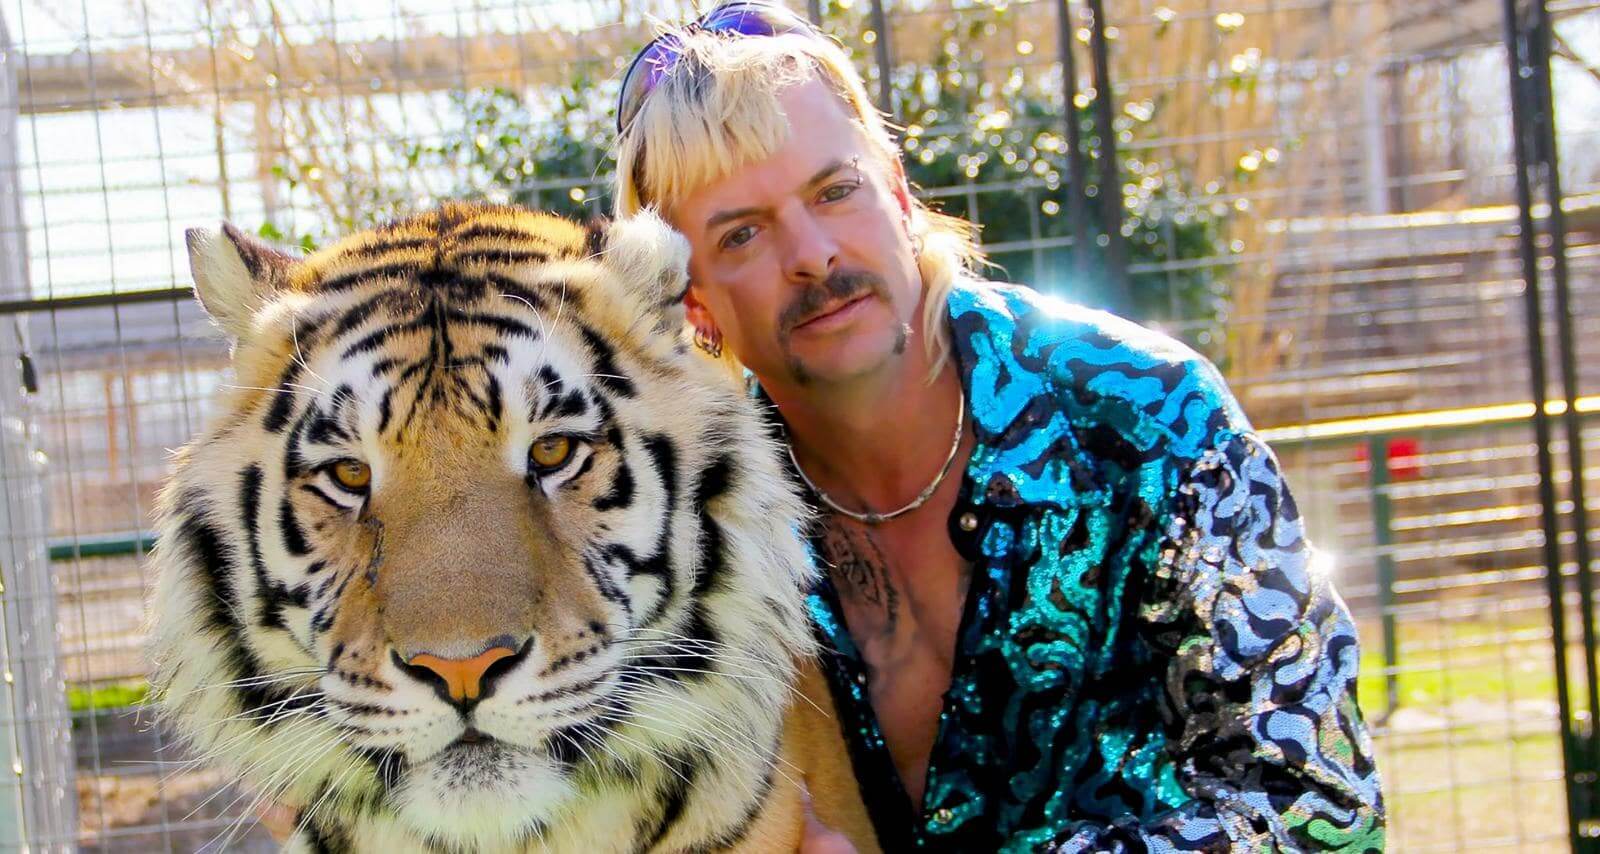 Joe Exotic Wiki, Age, Weddings, Husbands, Real Name and Complete Story of the Tiger King in New Netflix Documentary